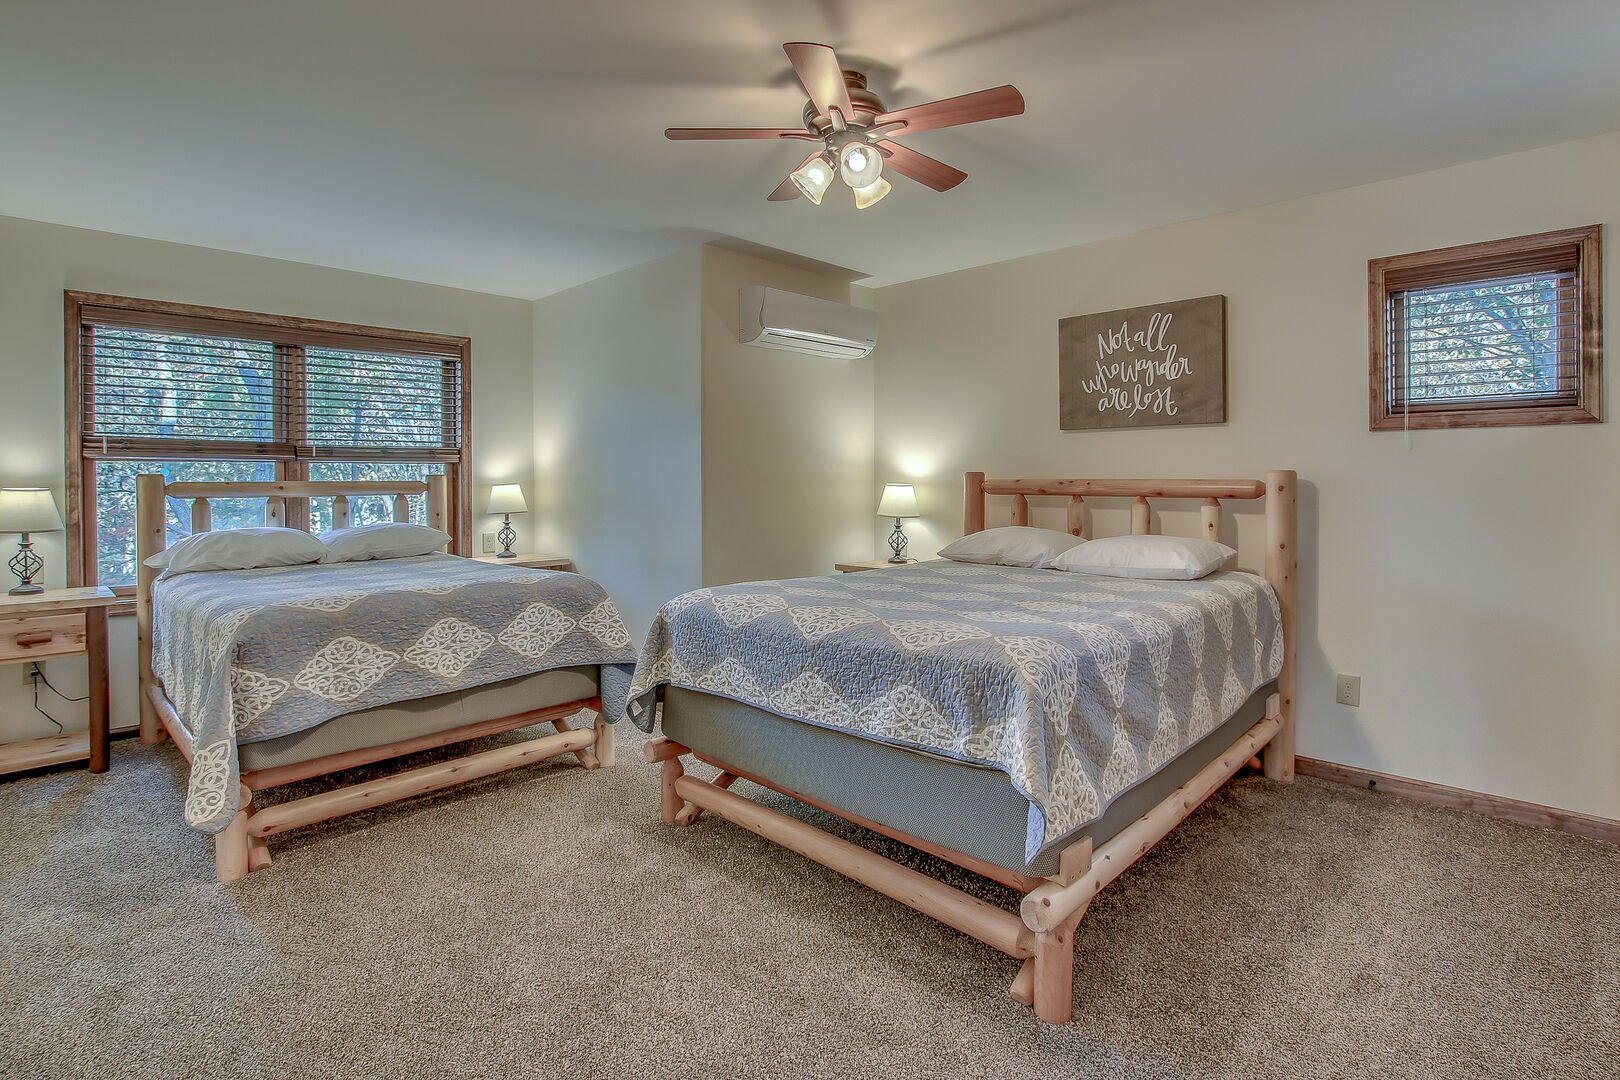 Spacious Bedroom with Two Beds and Ceiling Fan